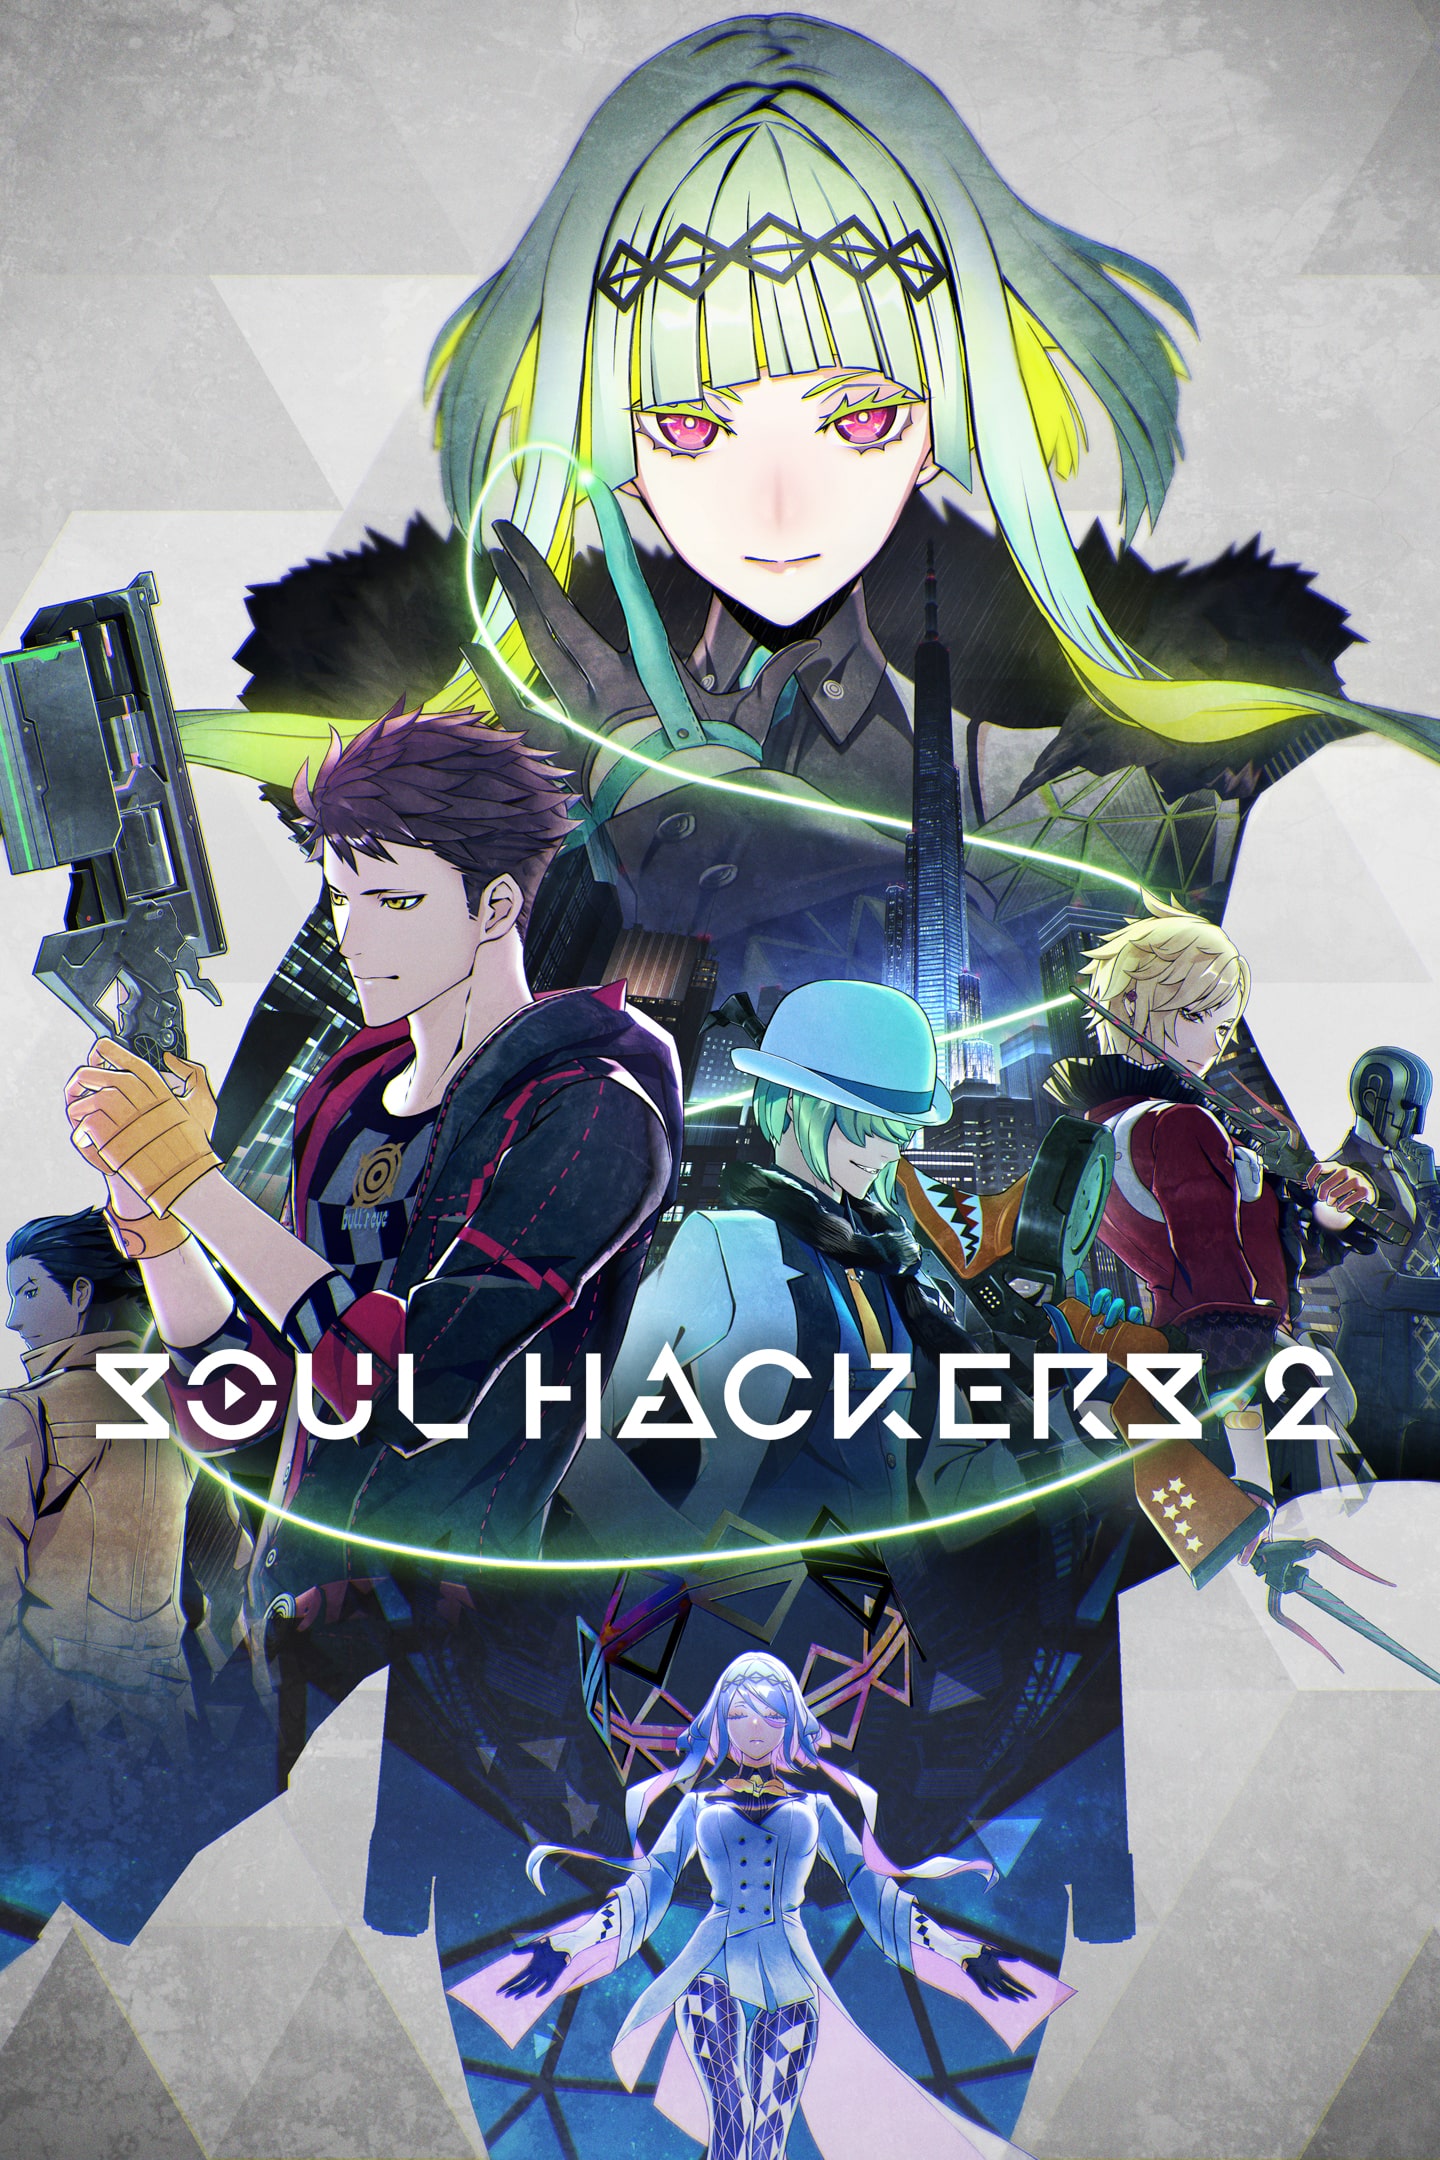 Soul Hackers 2 PS4 & PS5